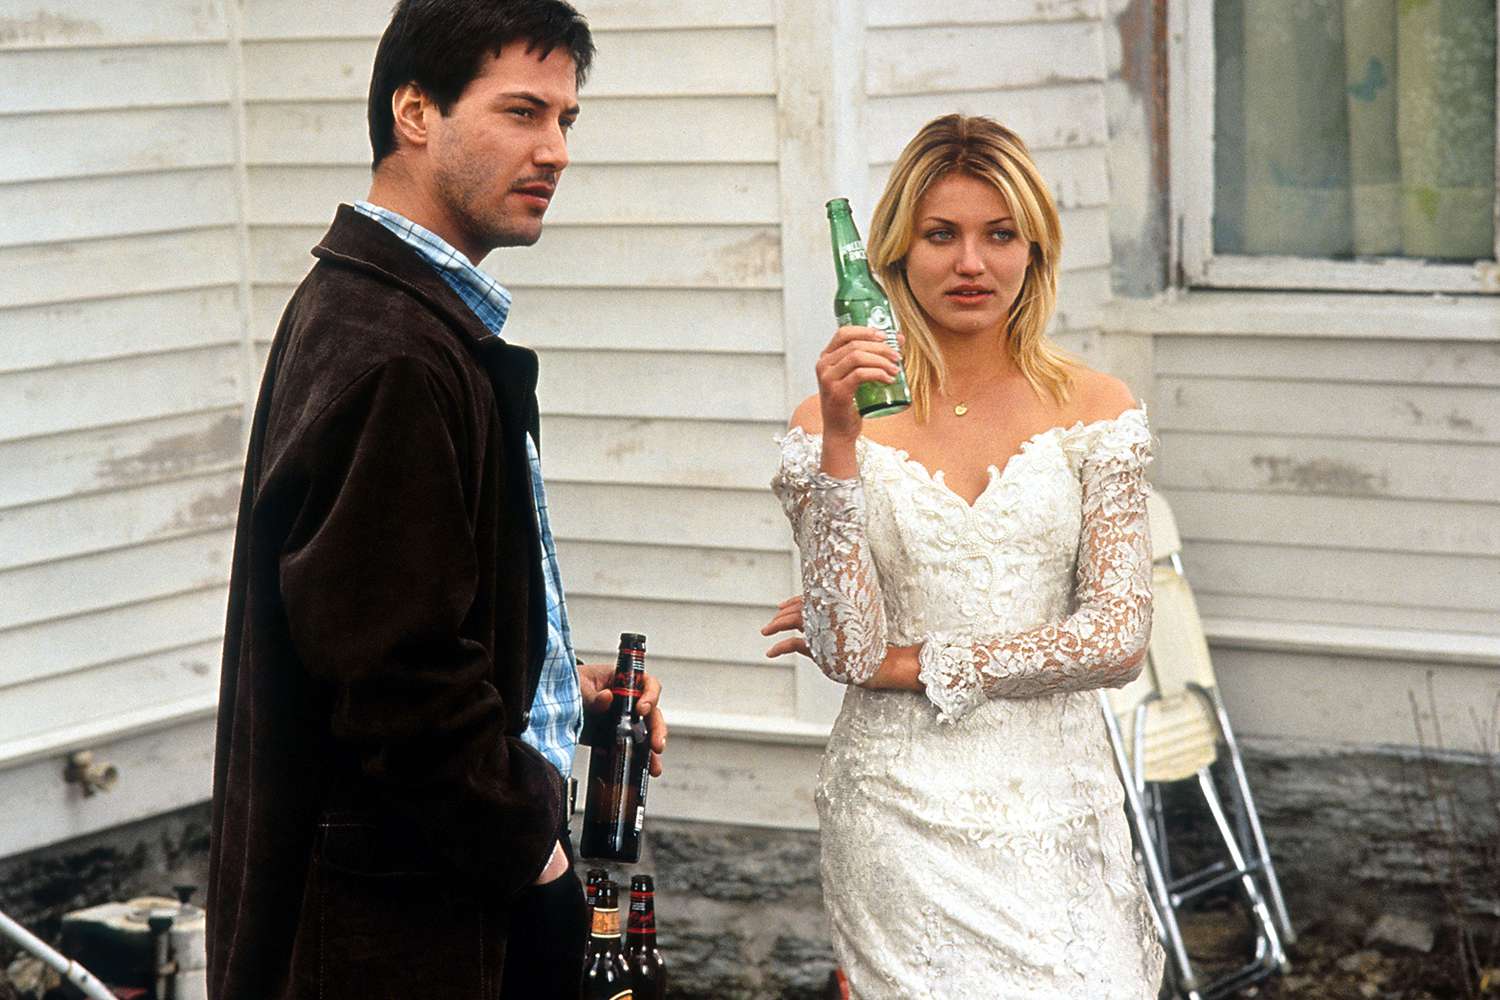 Keanu Reeves and Cameron Diaz having beers in a scene from the film 'Feeling Minnesota', 1996. 